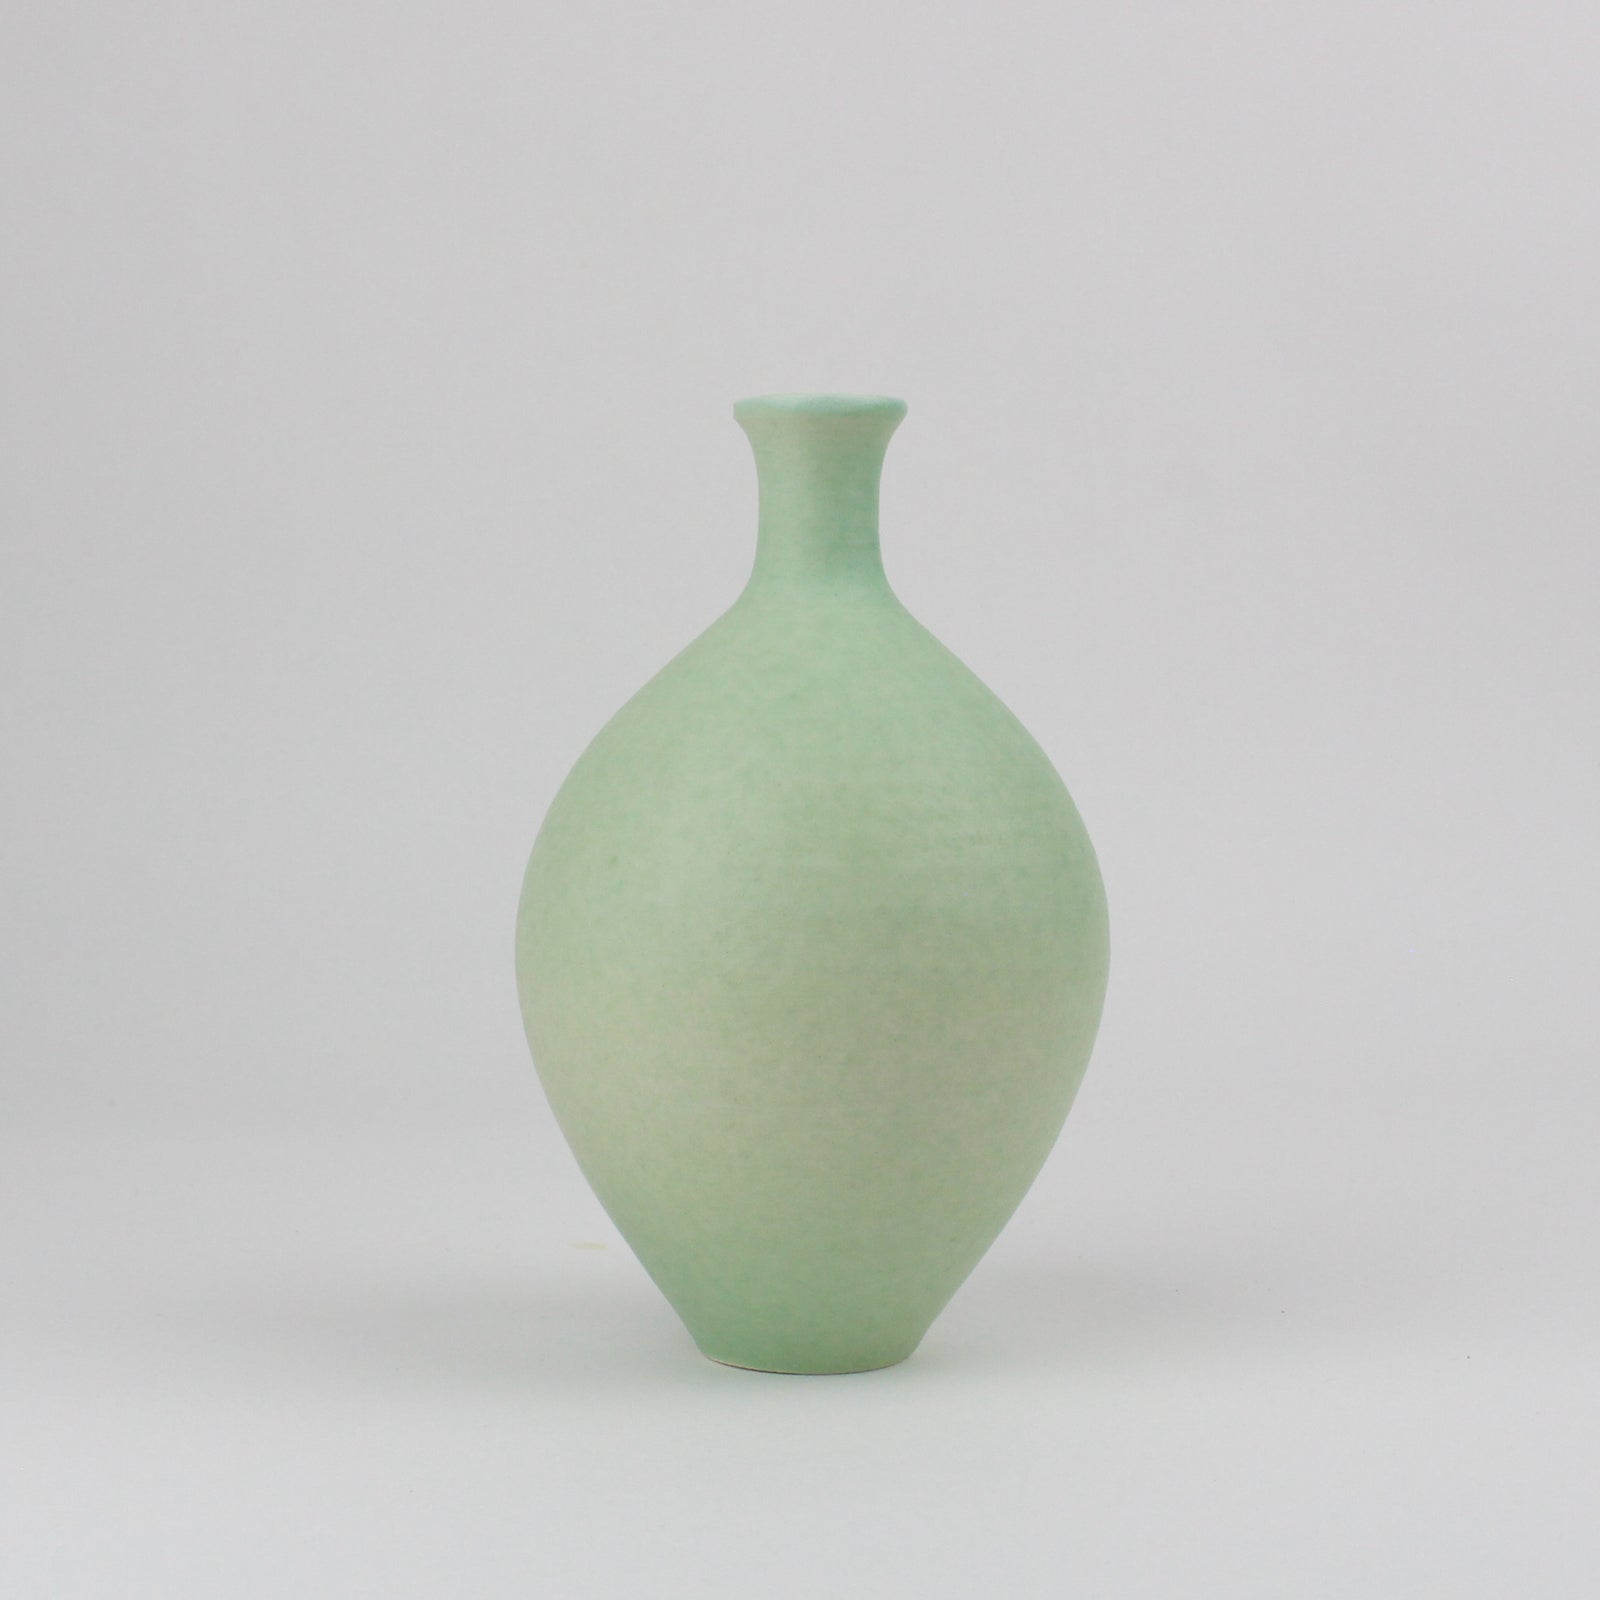 LB181 Duck Egg Oval Vase by Lucy Burley, available at Padstow Gallery, Cornwall